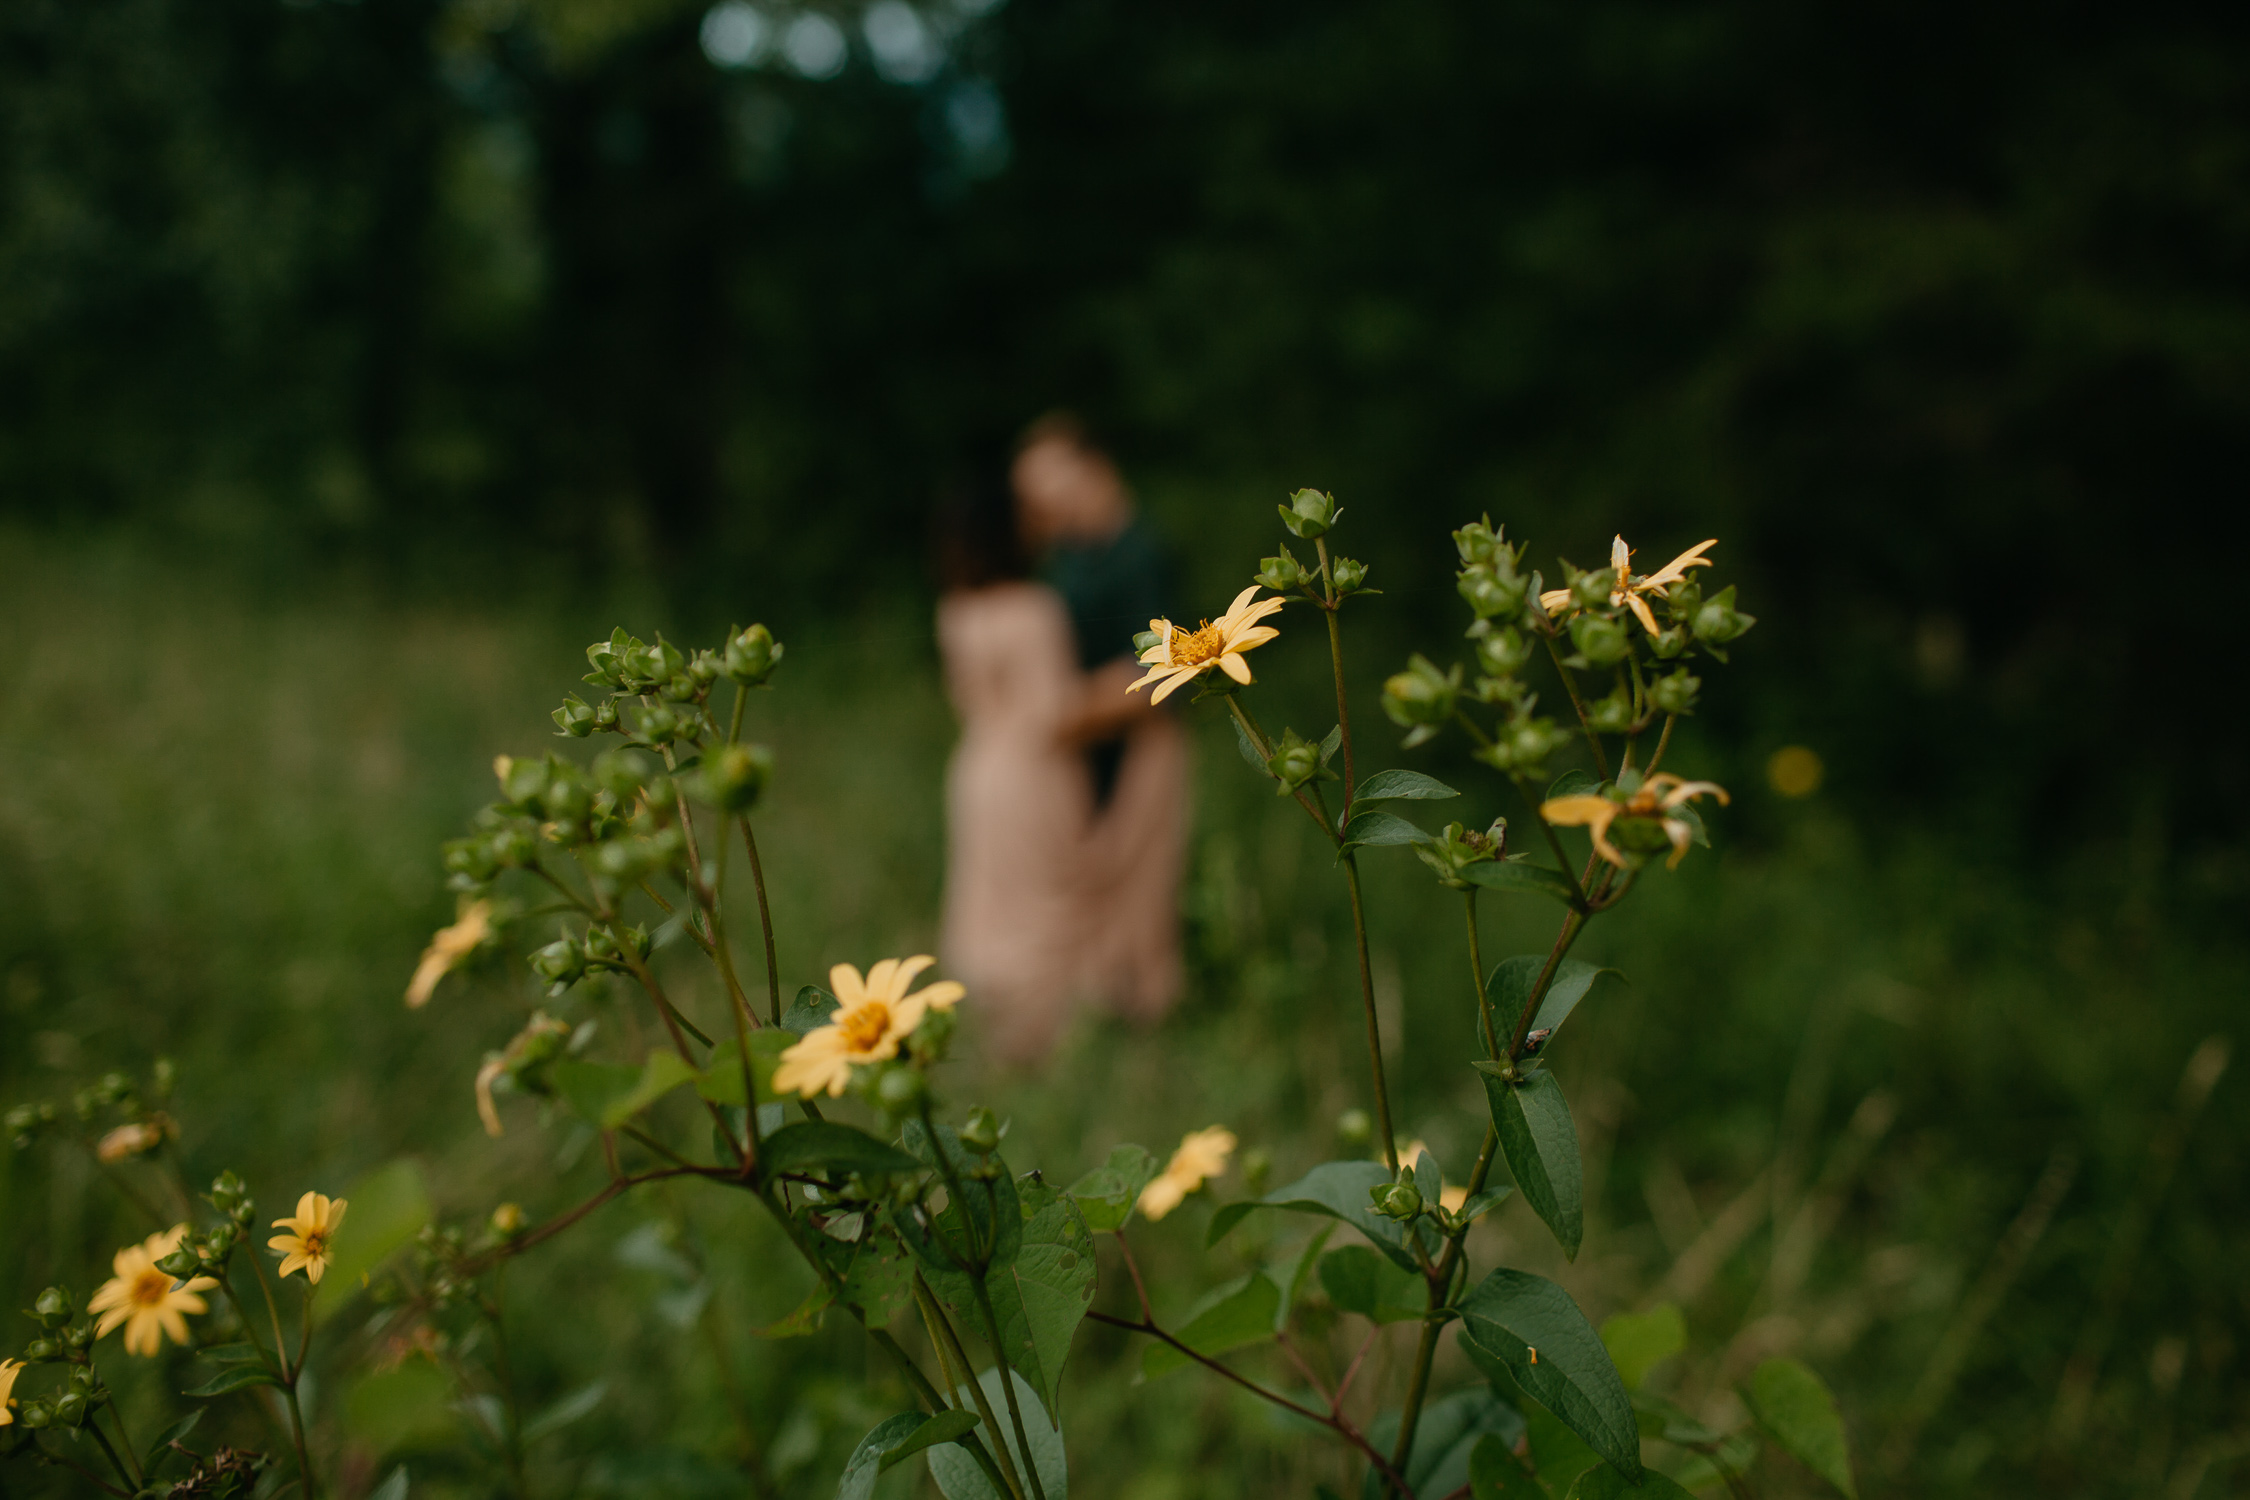 ariannamtorres and isaac engagement session at cades cove smoky mountains elopement-51.jpg